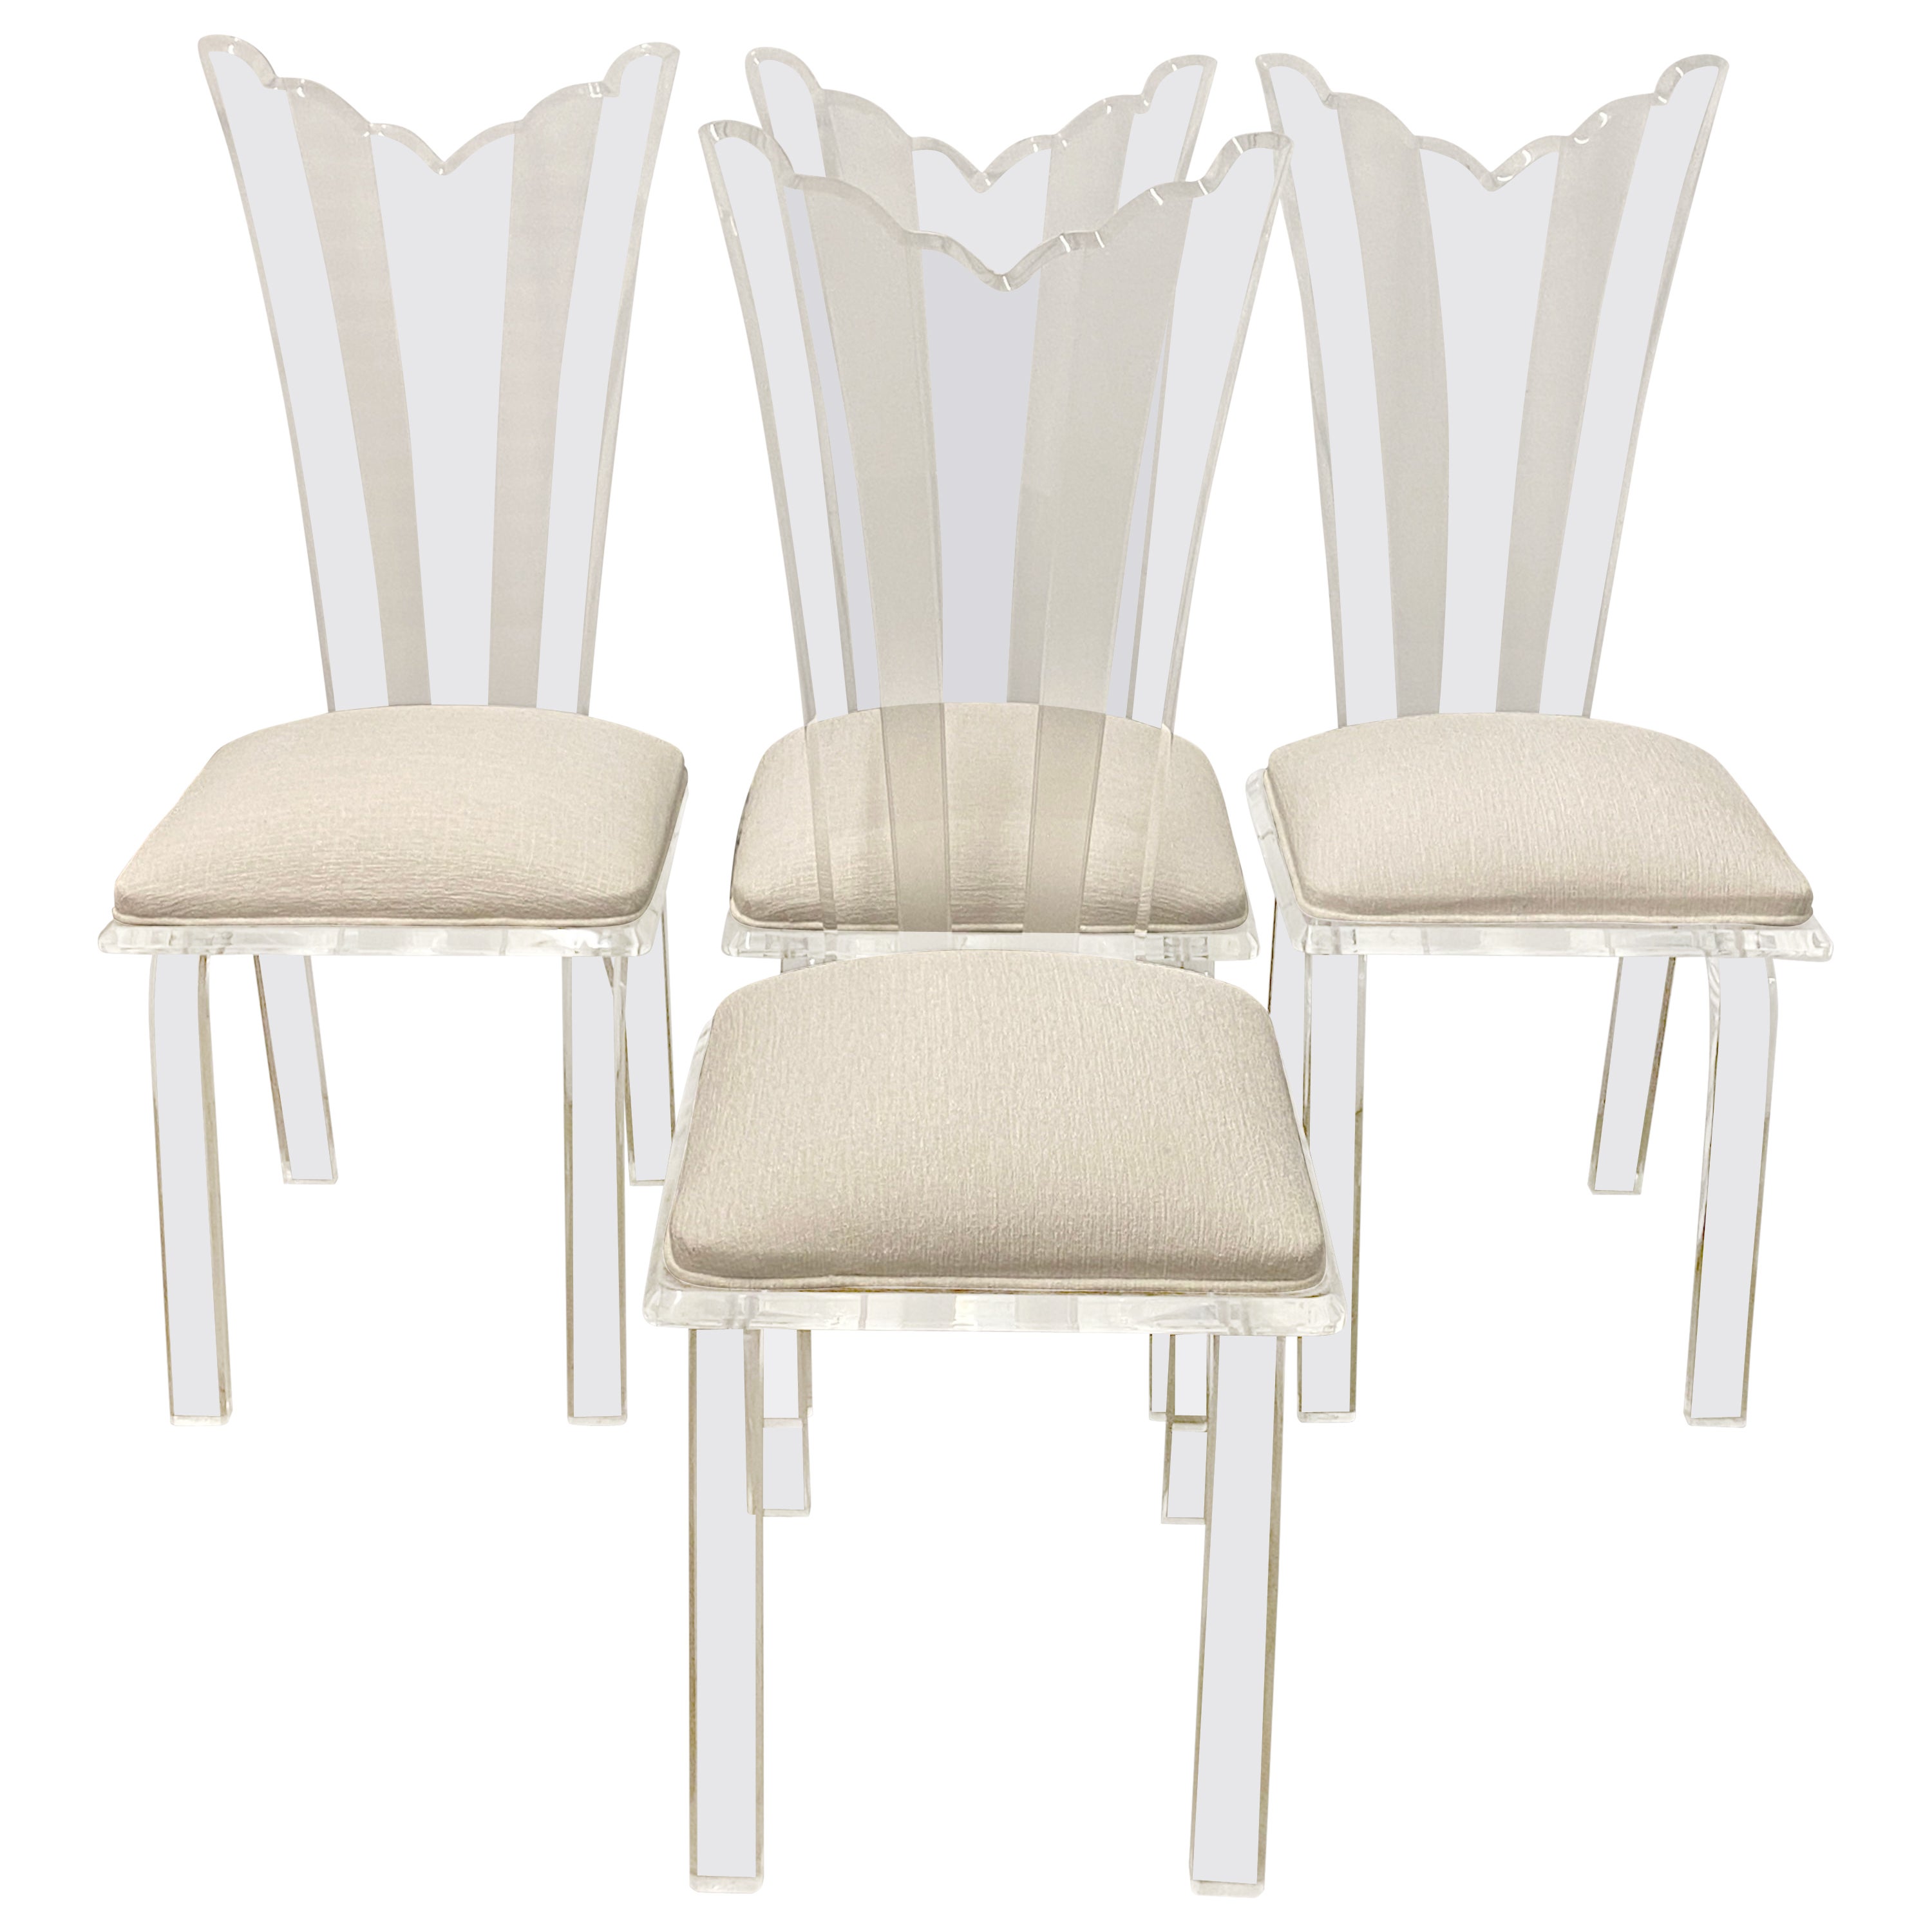 Set of 4 Vintage Scalloped Edged Lucite Dining Chairs Attrib. to Neal Small